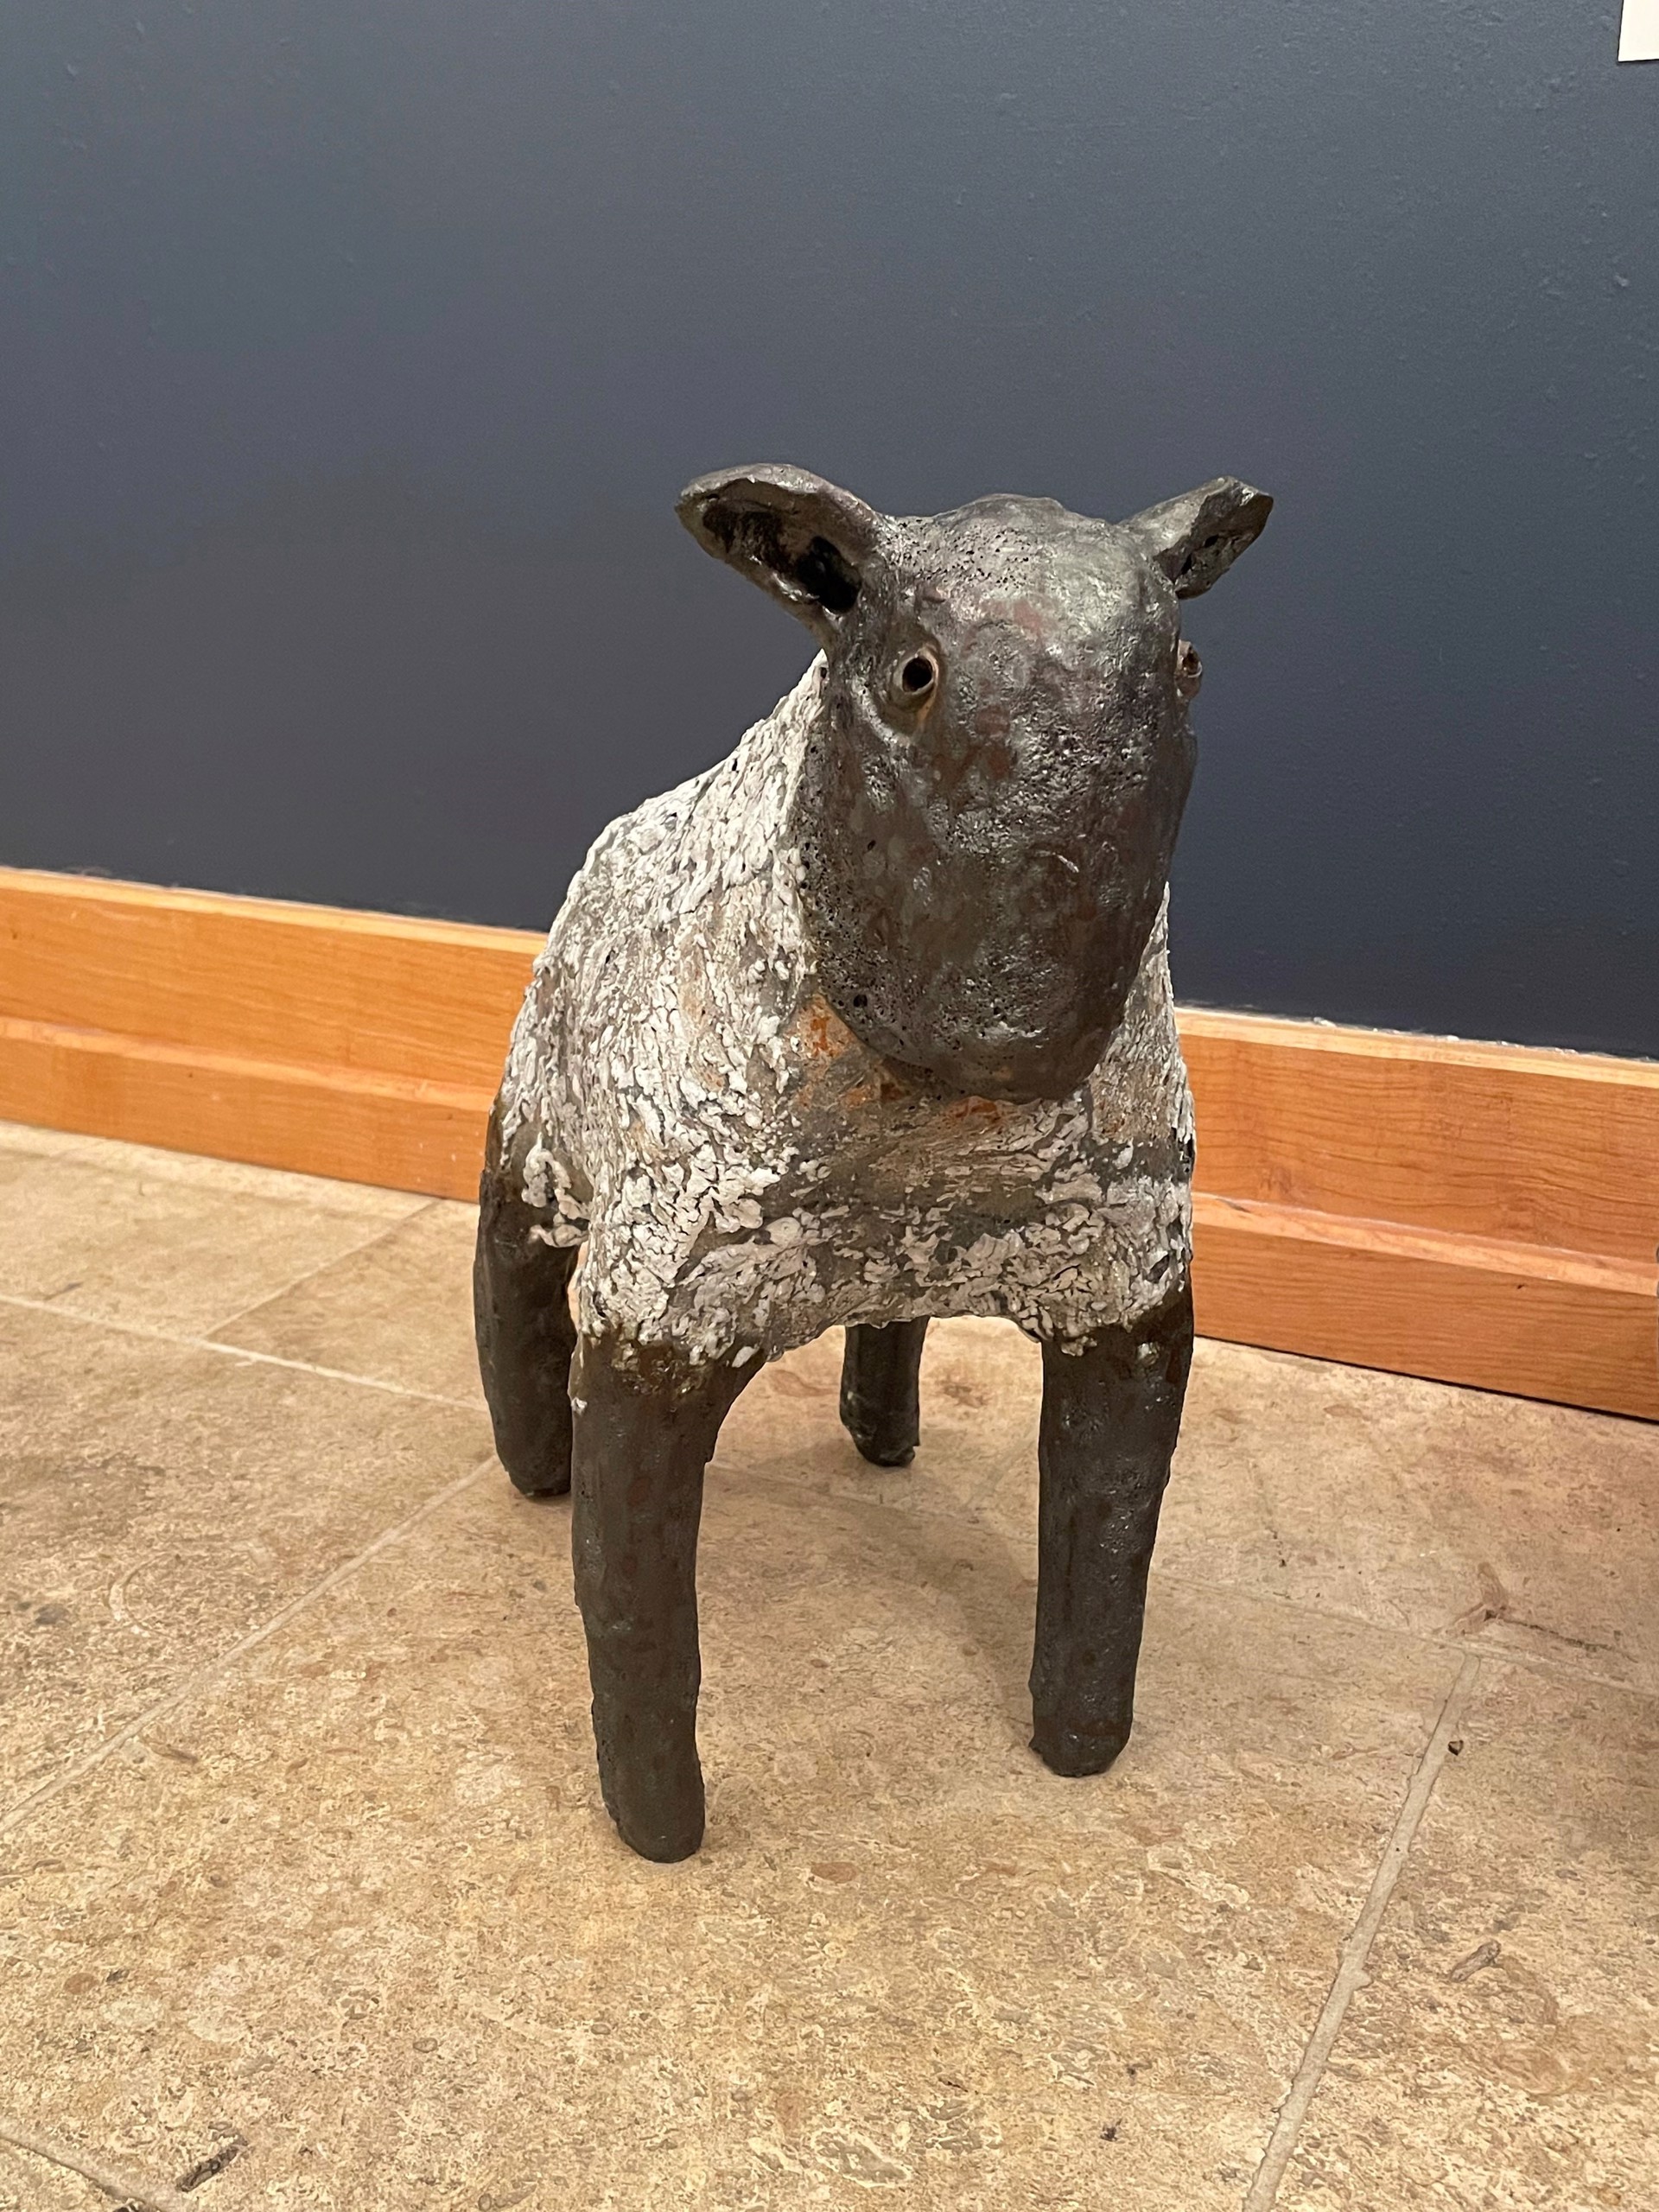 Lamb IV by Mark Chatterley